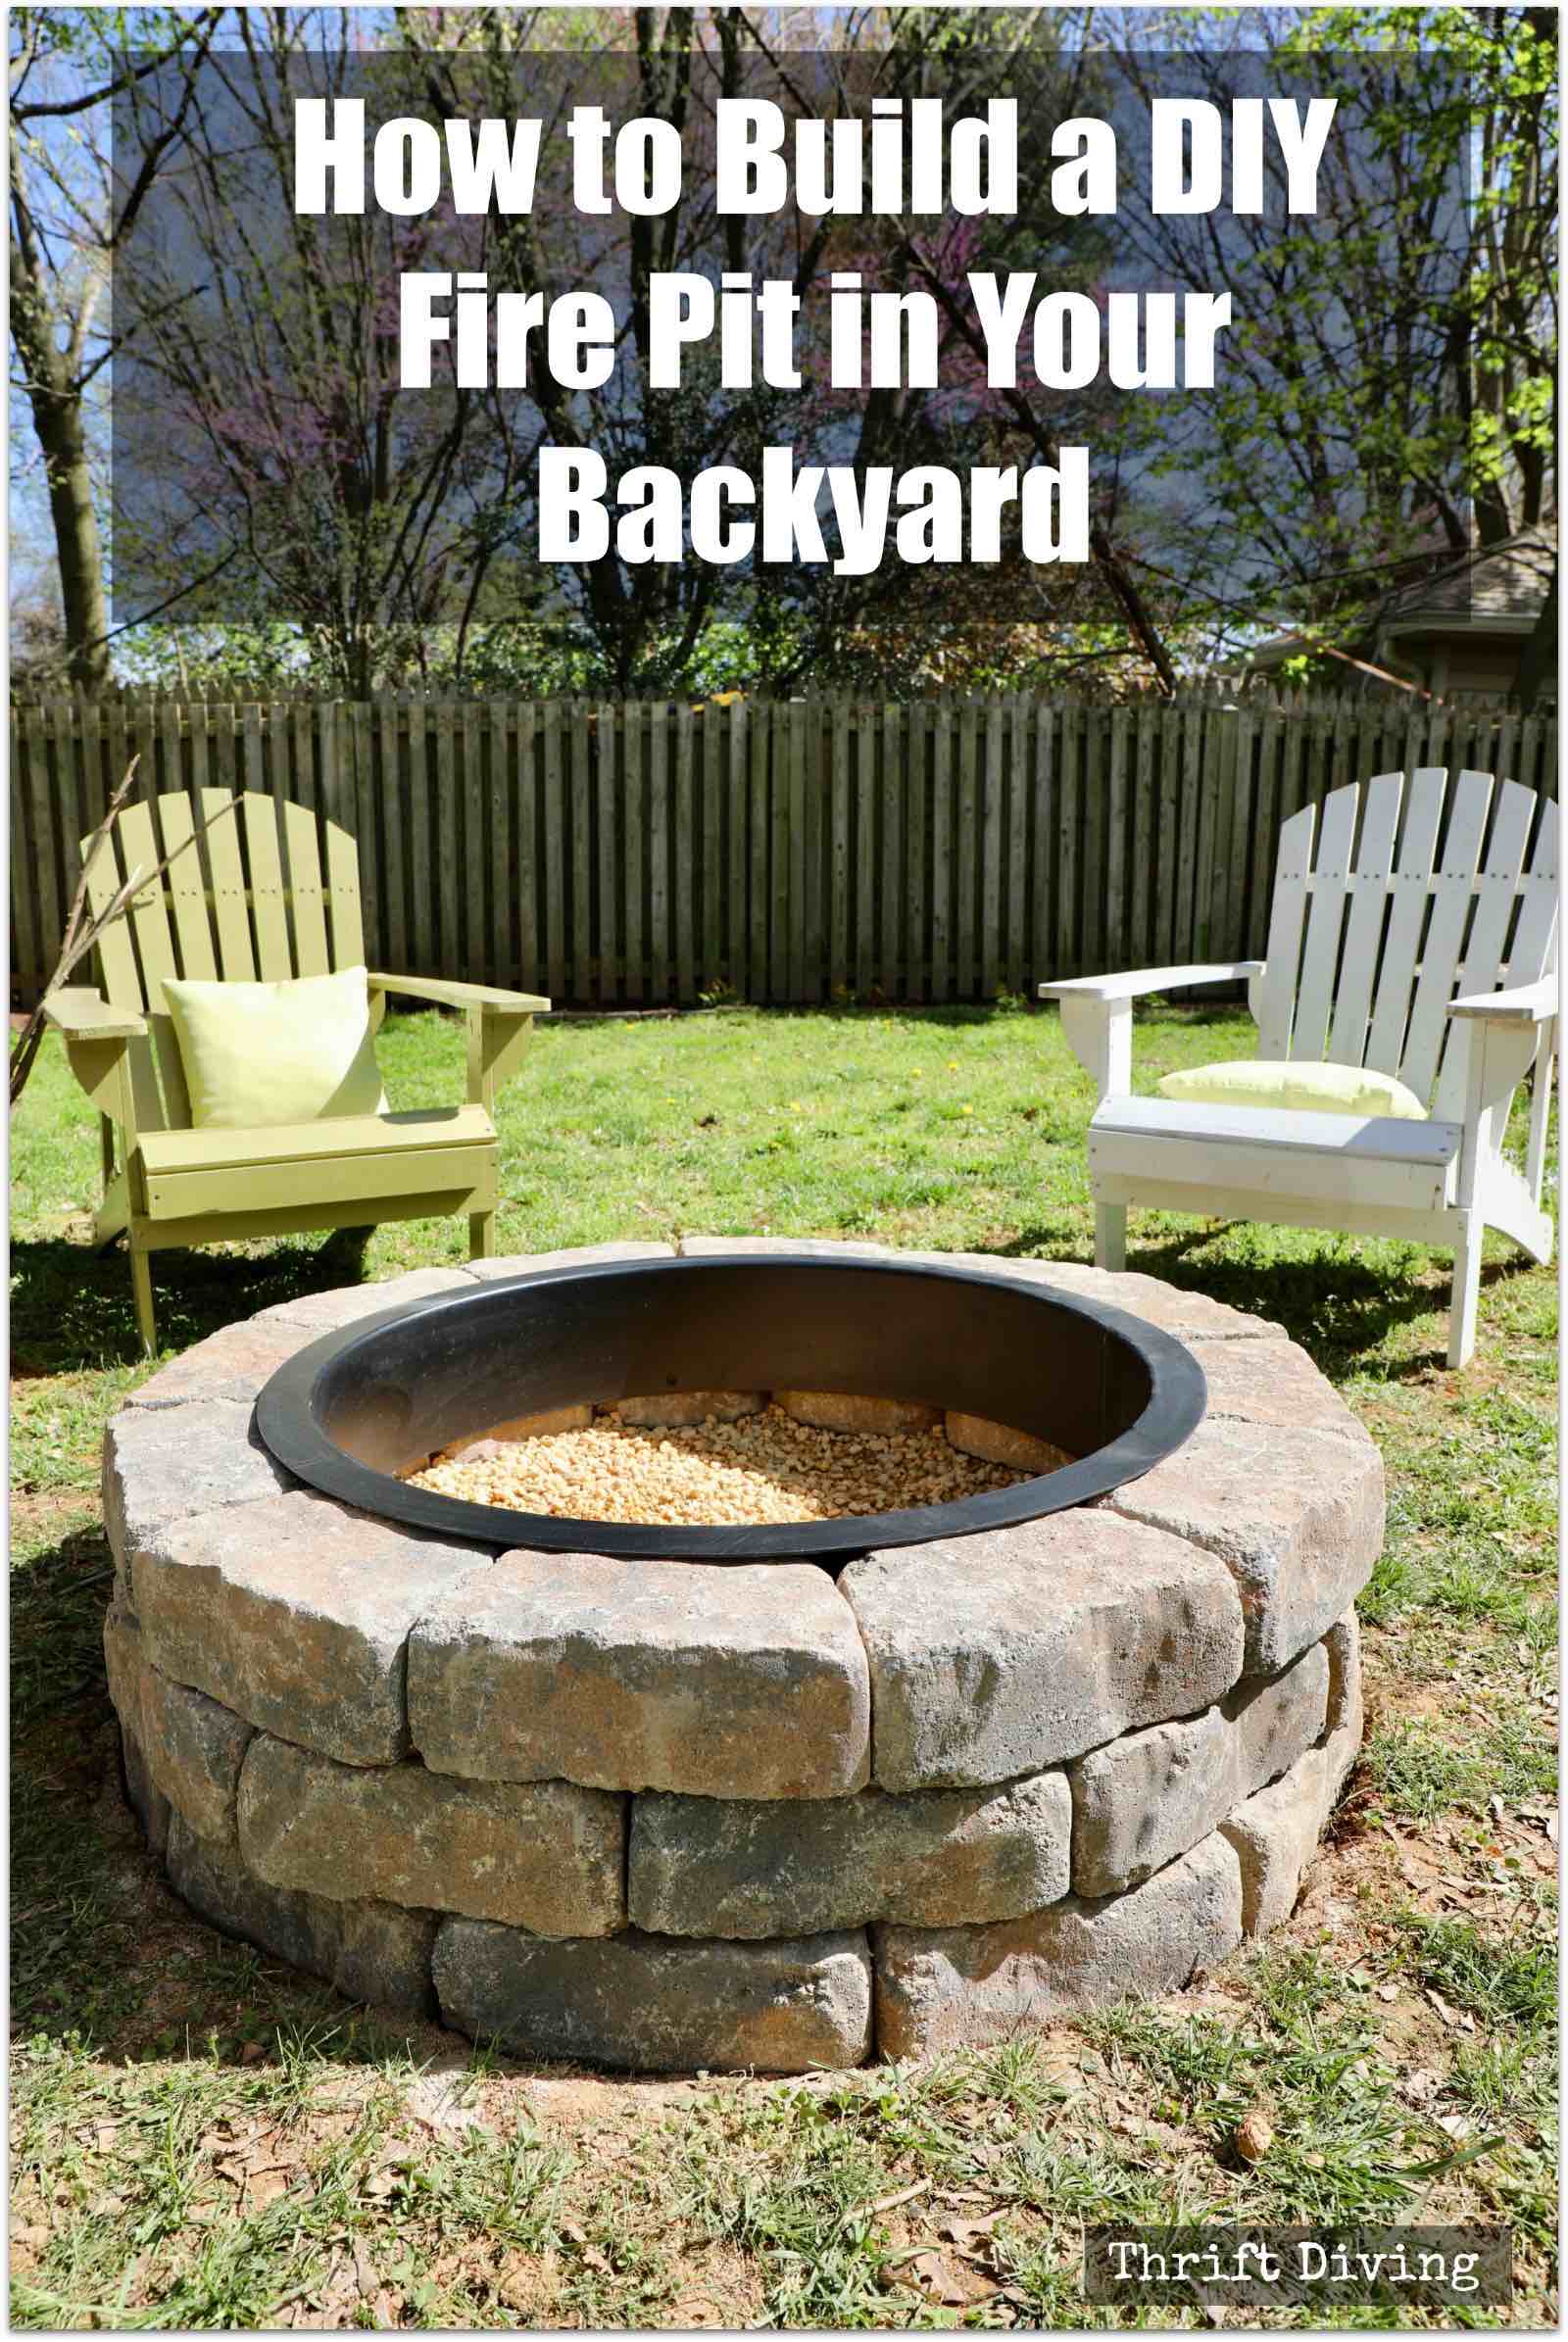 51 HQ Photos How To Make Fire Pit In Backyard : Fire Pit Project (you can do in one hour!)